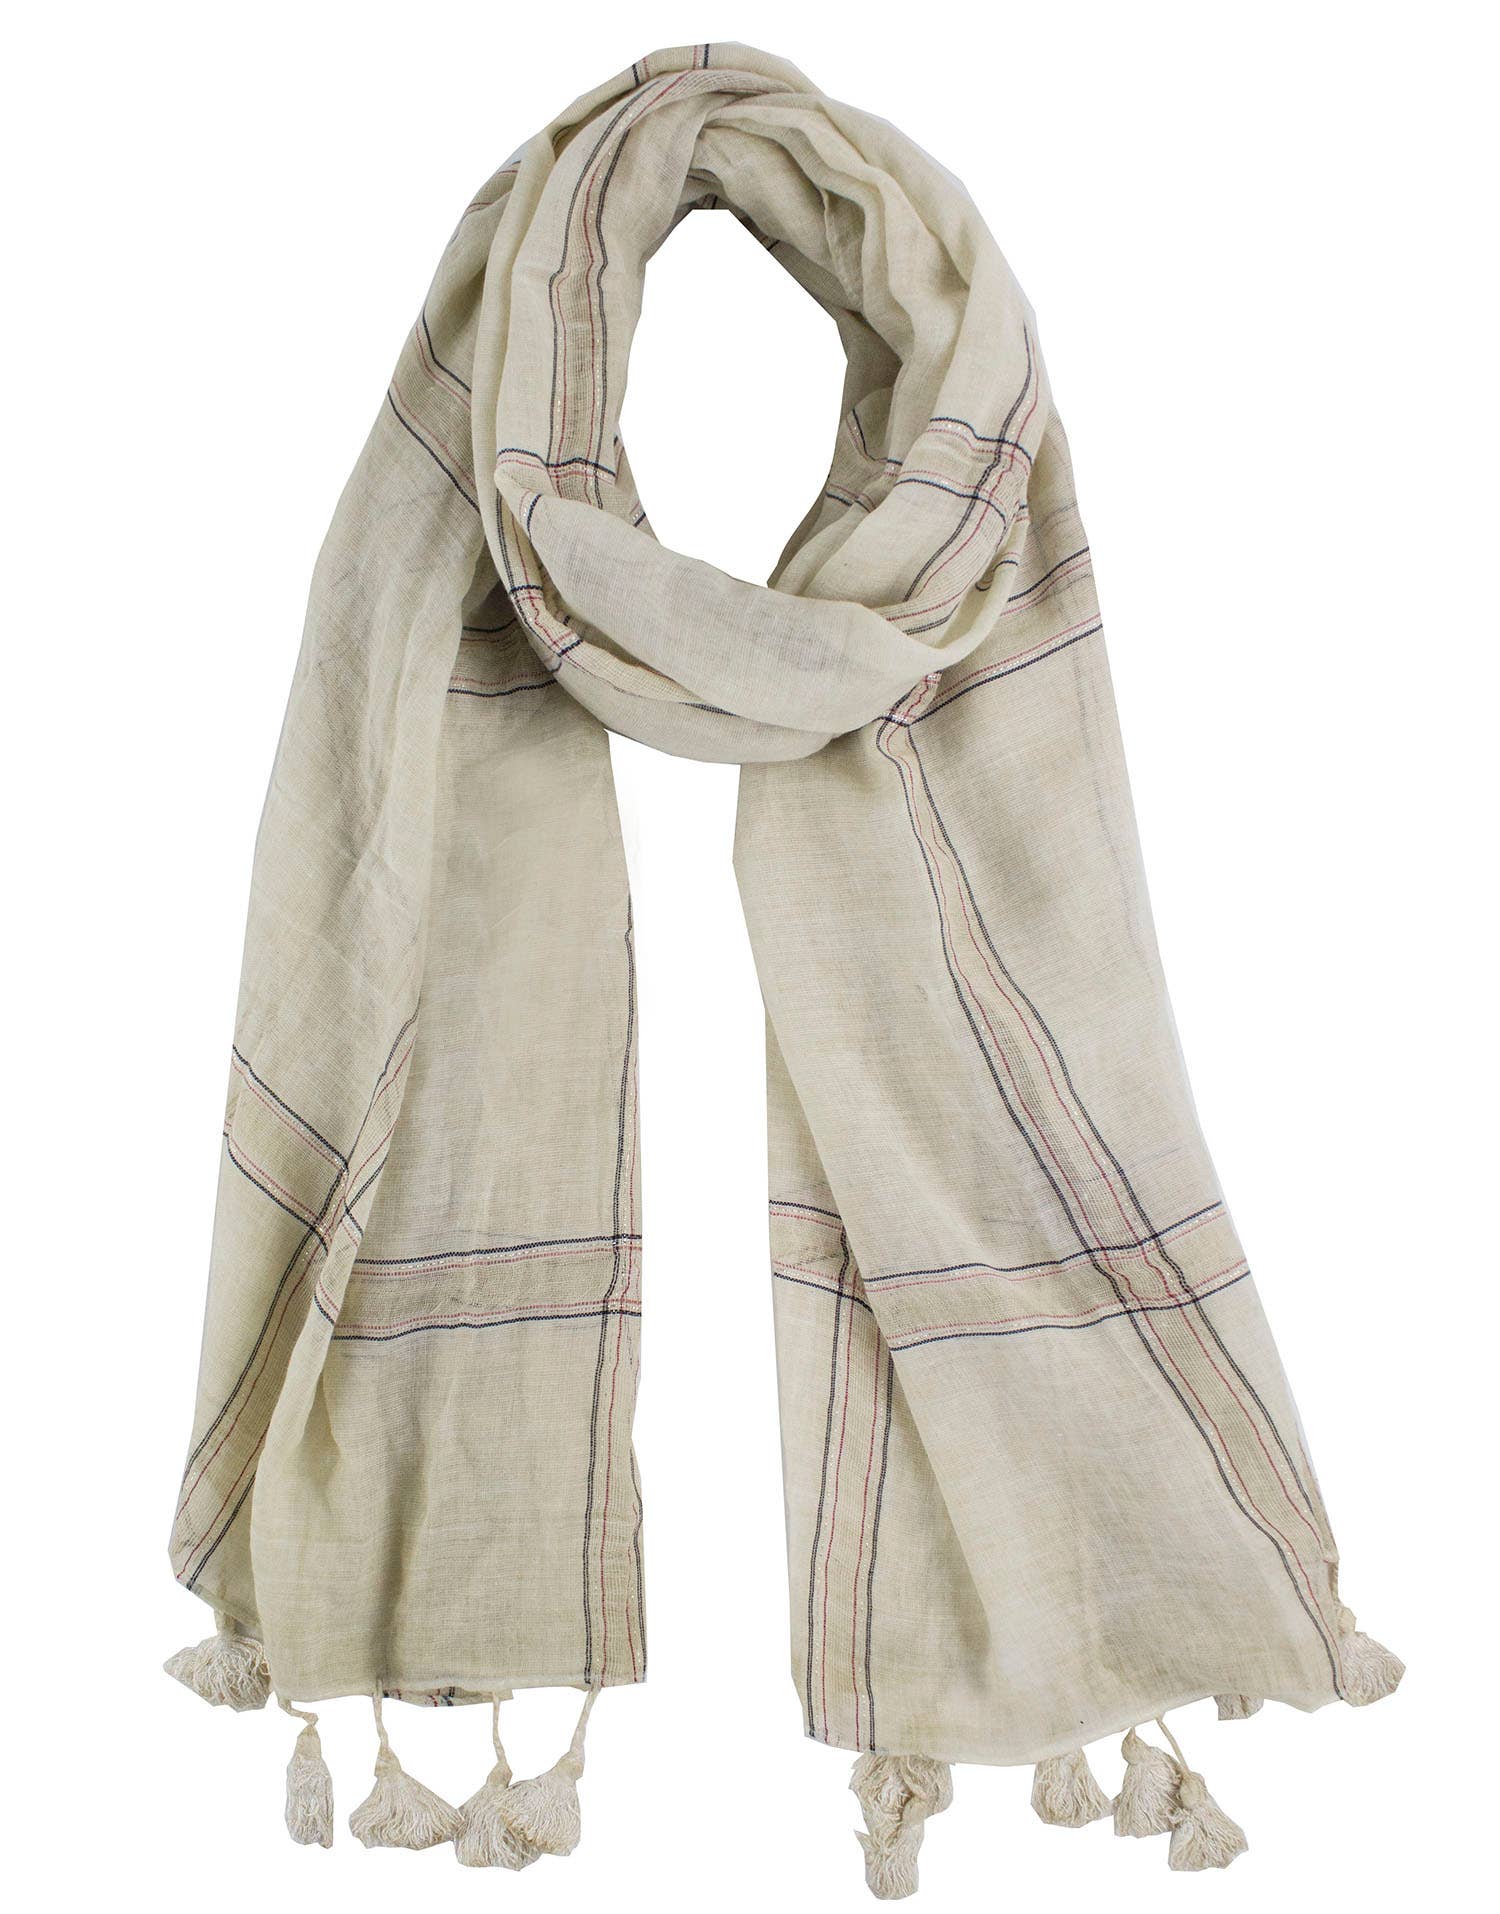 Plaid Garment Dye Cotton Wrap Scarf with Tassel - Out of the Blue